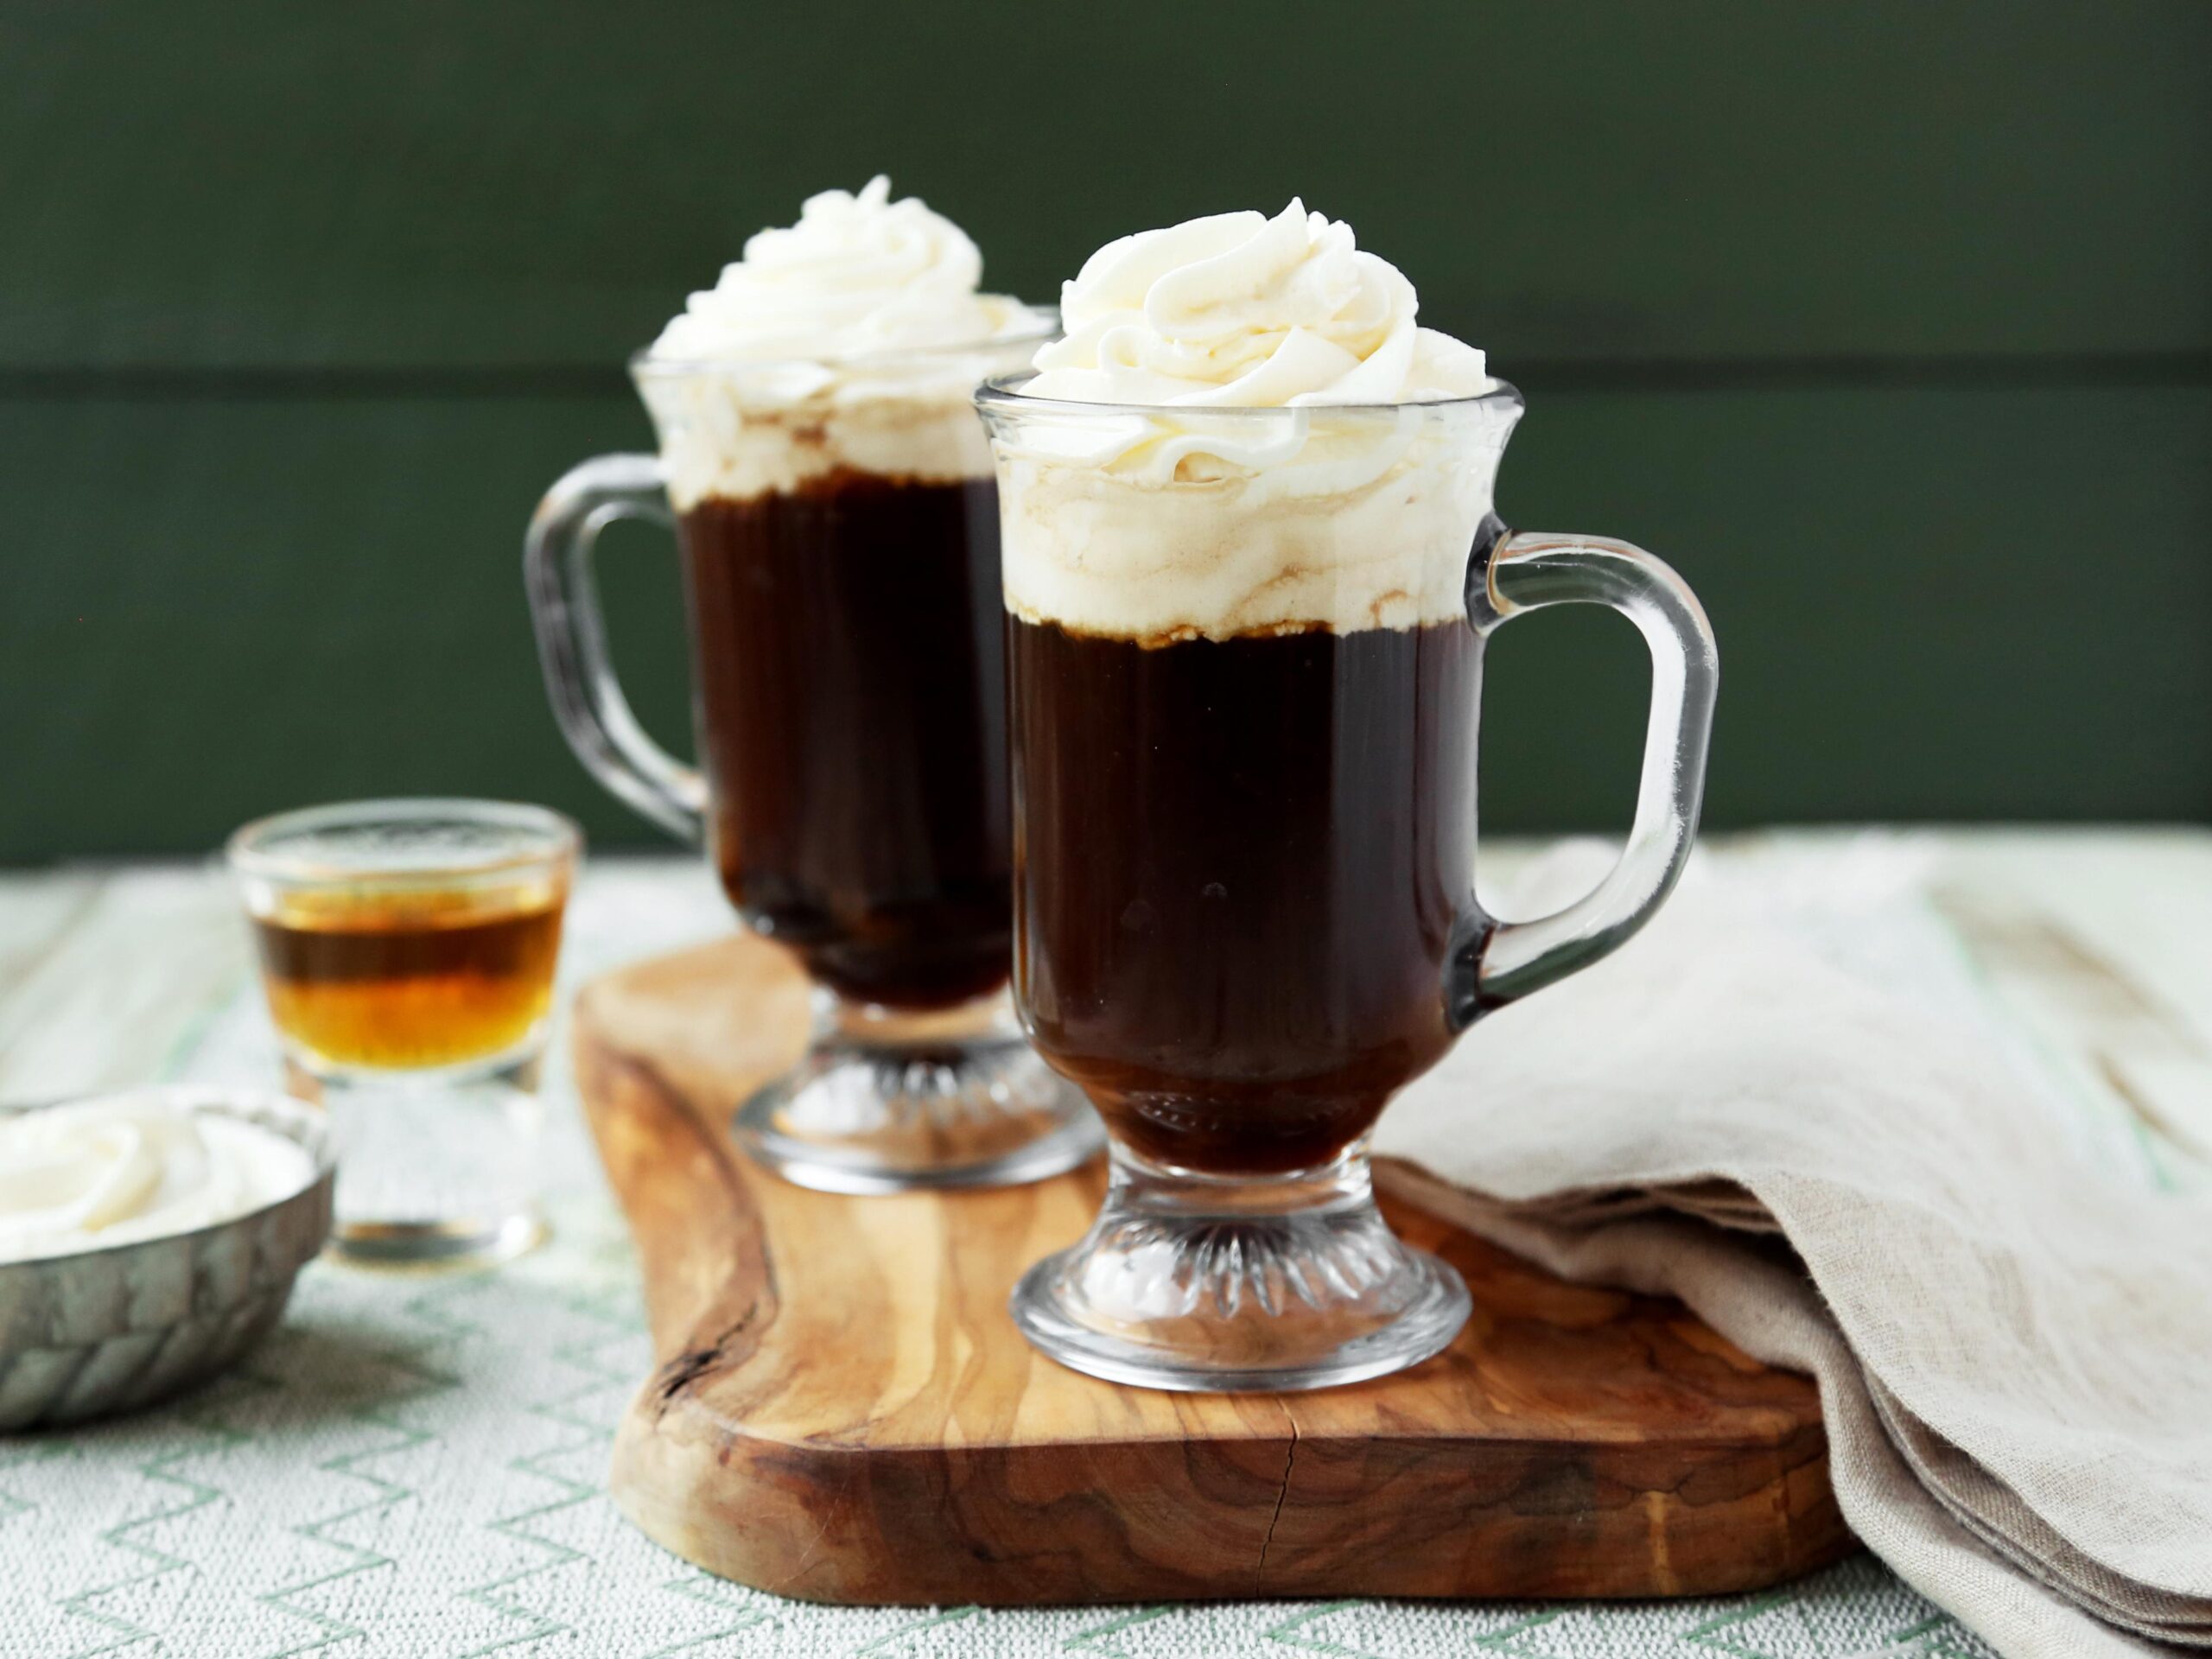  Get ready to taste the creamiest Irish Coffee that will leave you with a smile.